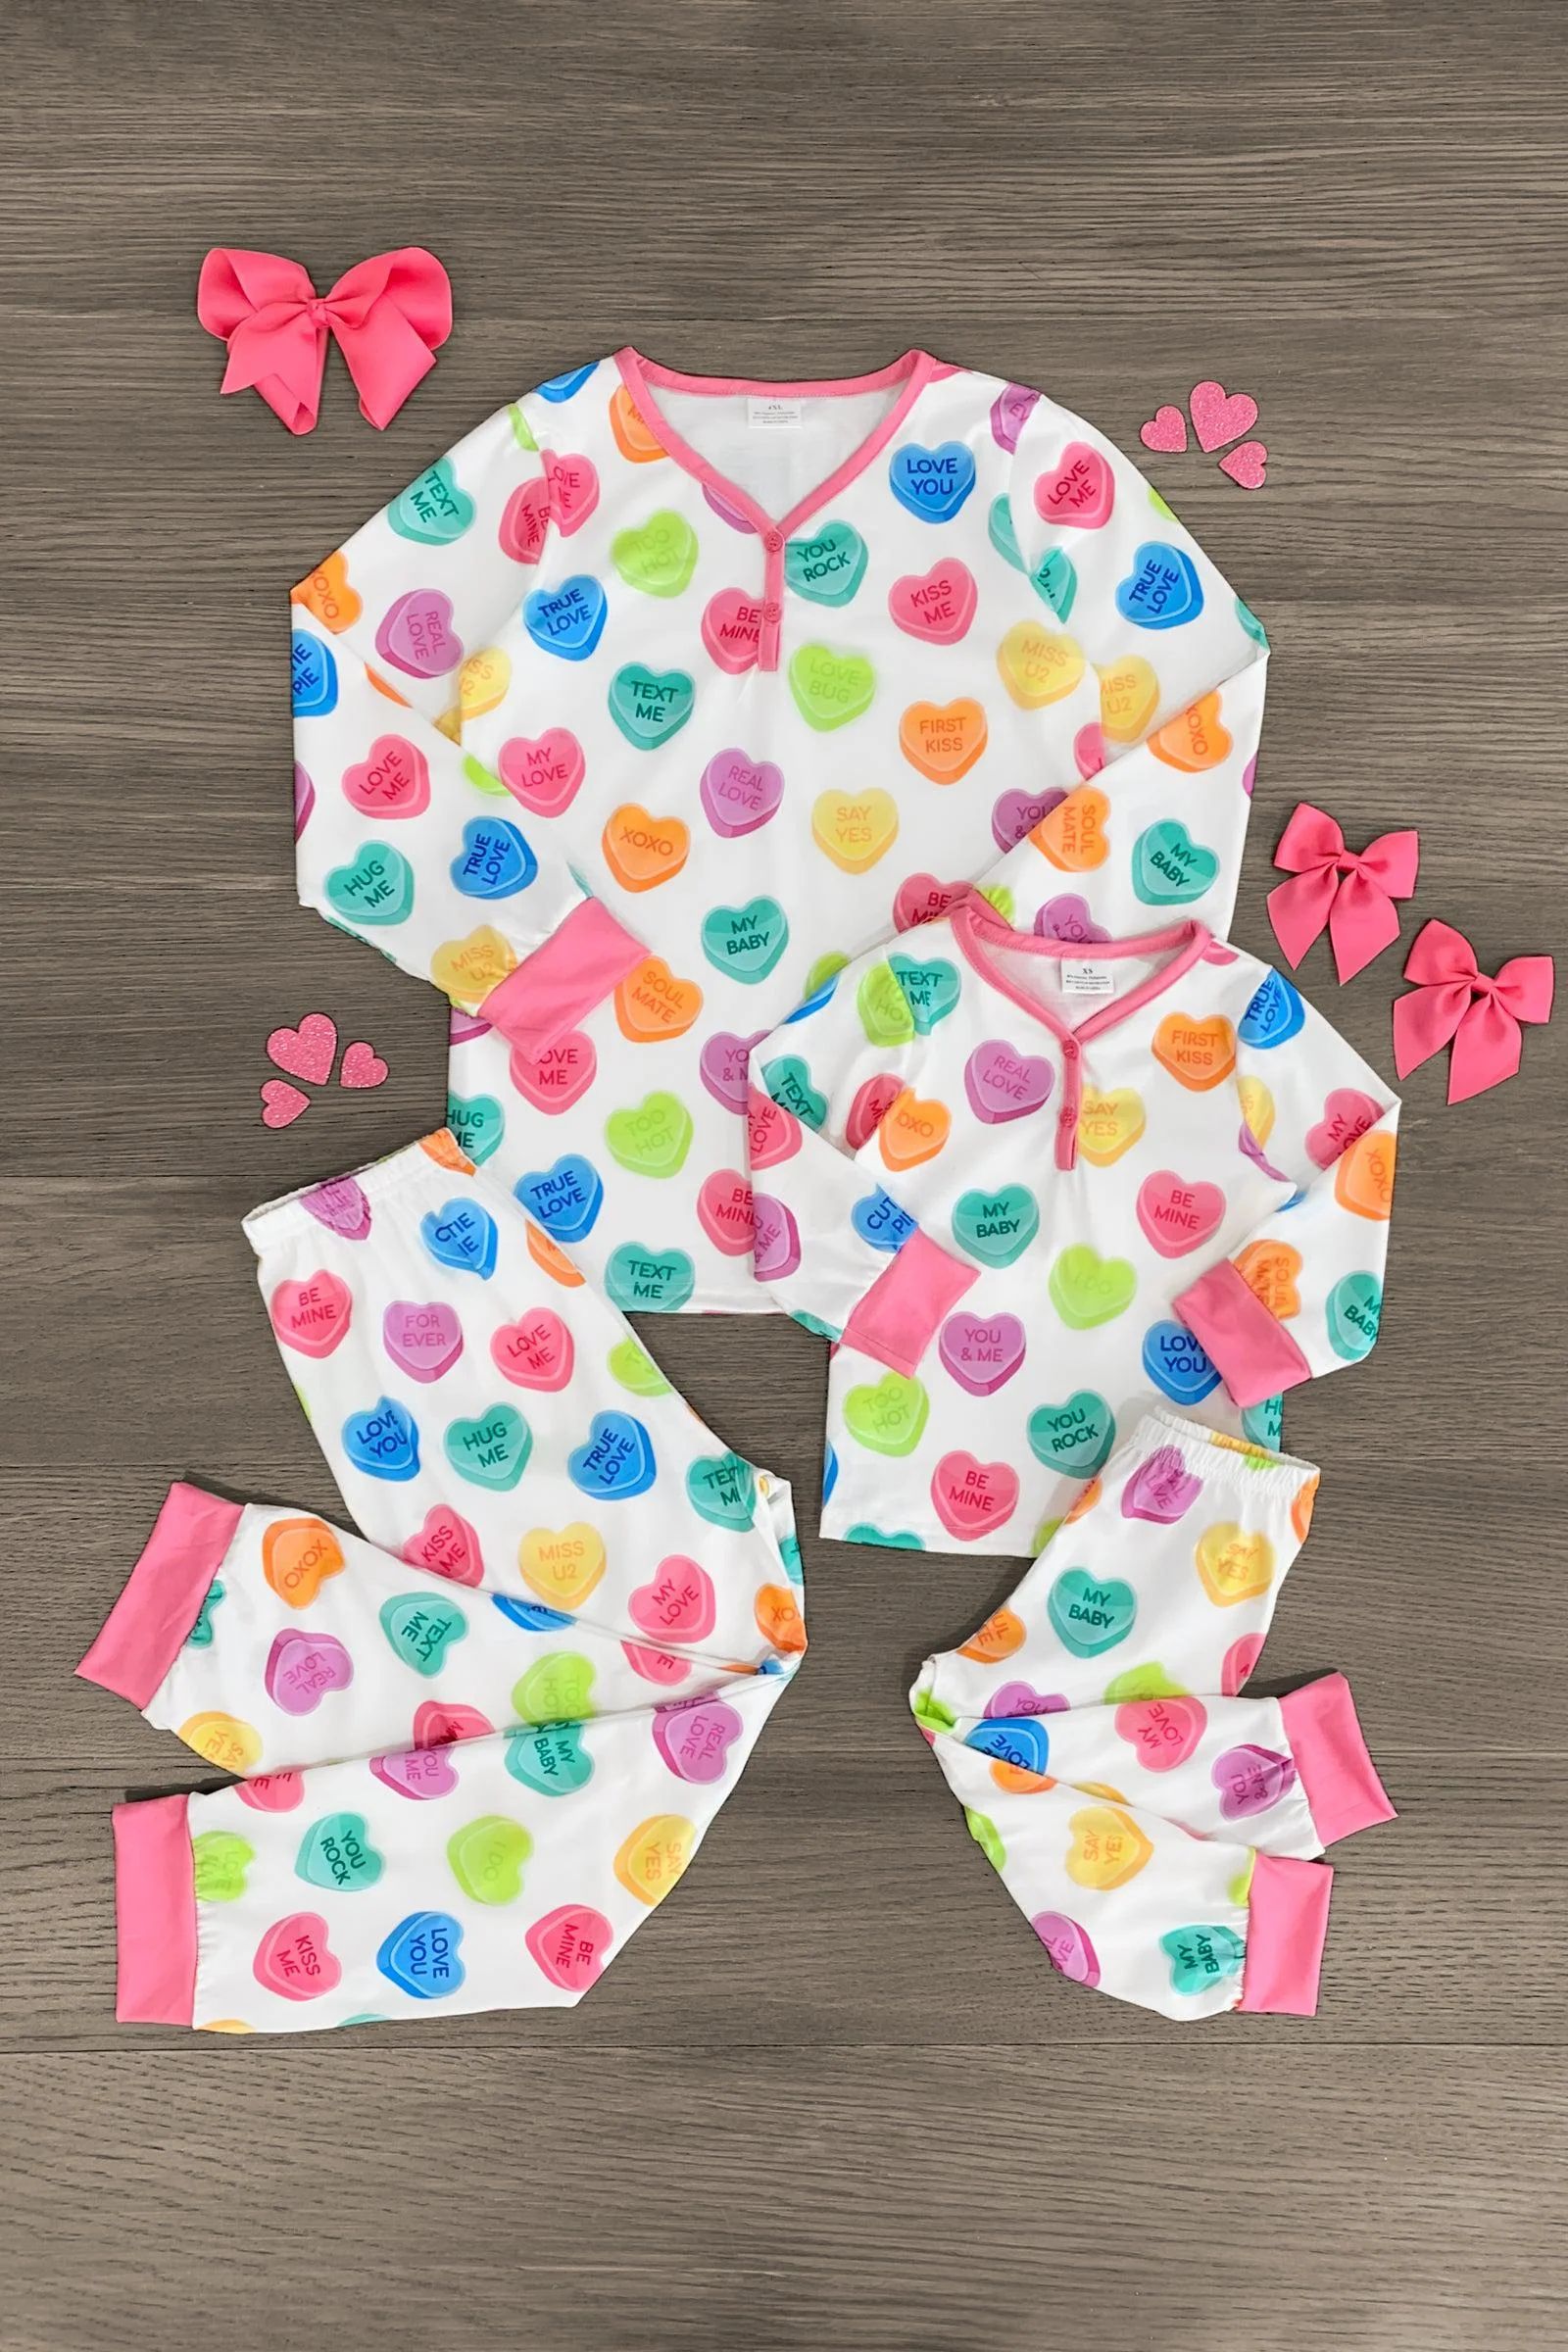 Mom & Me - White Candy Heart Pajamas | Sparkle In Pink